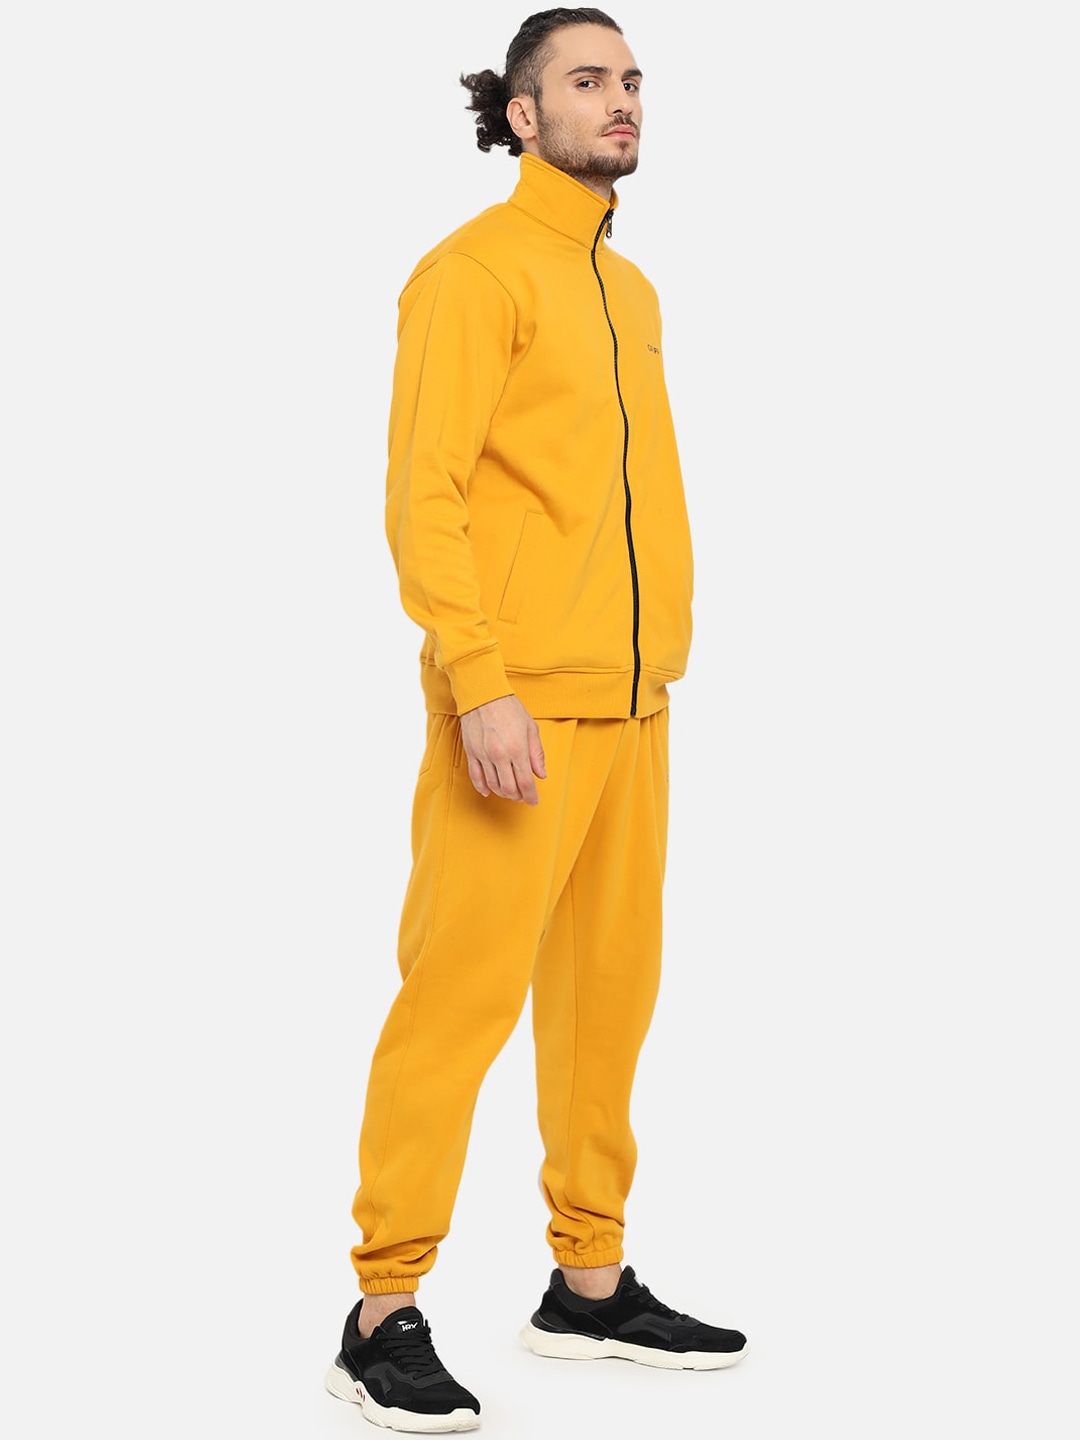 Clothing Tracksuits | GRIFFEL Men Mustard Yellow Solid Cotton Tracksuit - HO21841